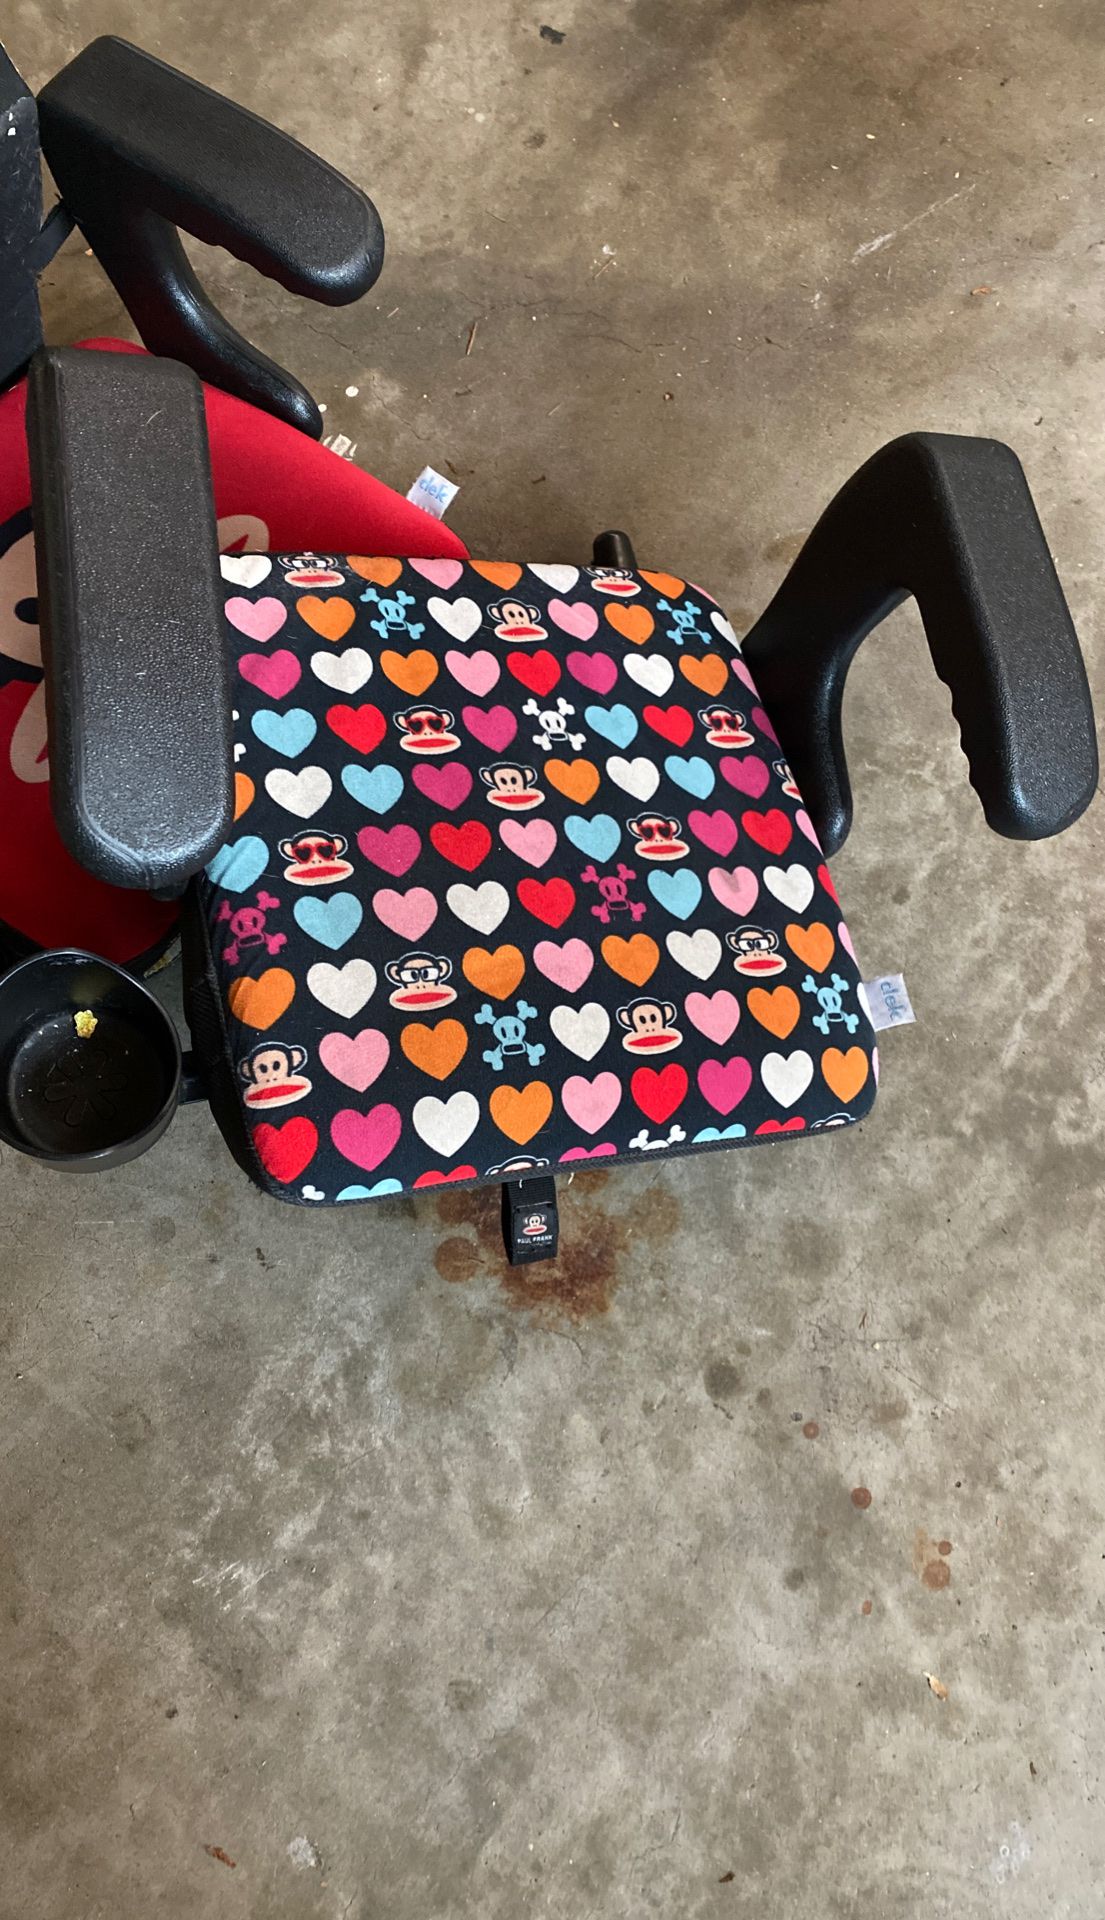 Paul Frank hearts 💕 Edition booster seat by Clek